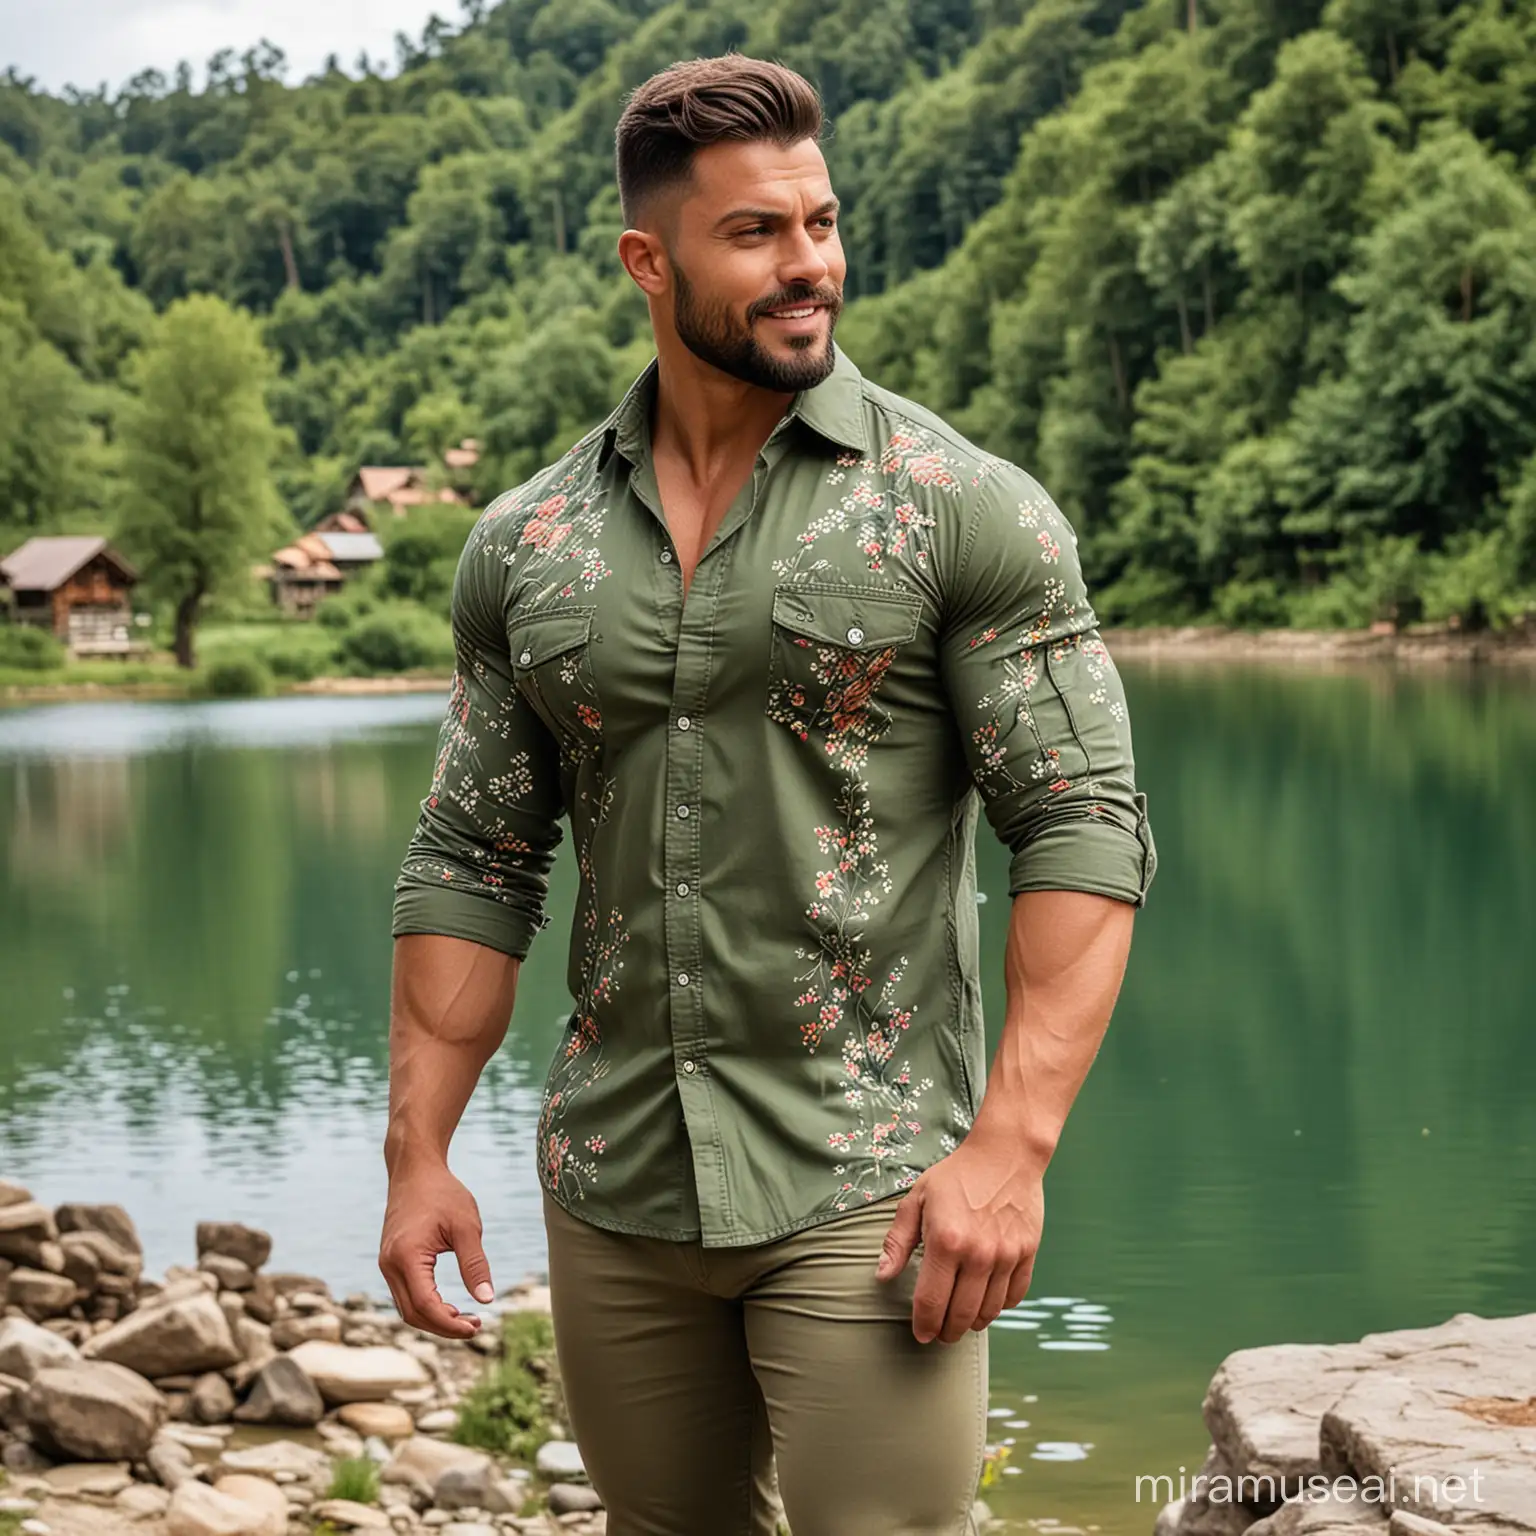 Big giant muscular build men wearing olive unbuttoned double pocket shirt with flowery printat village at lake